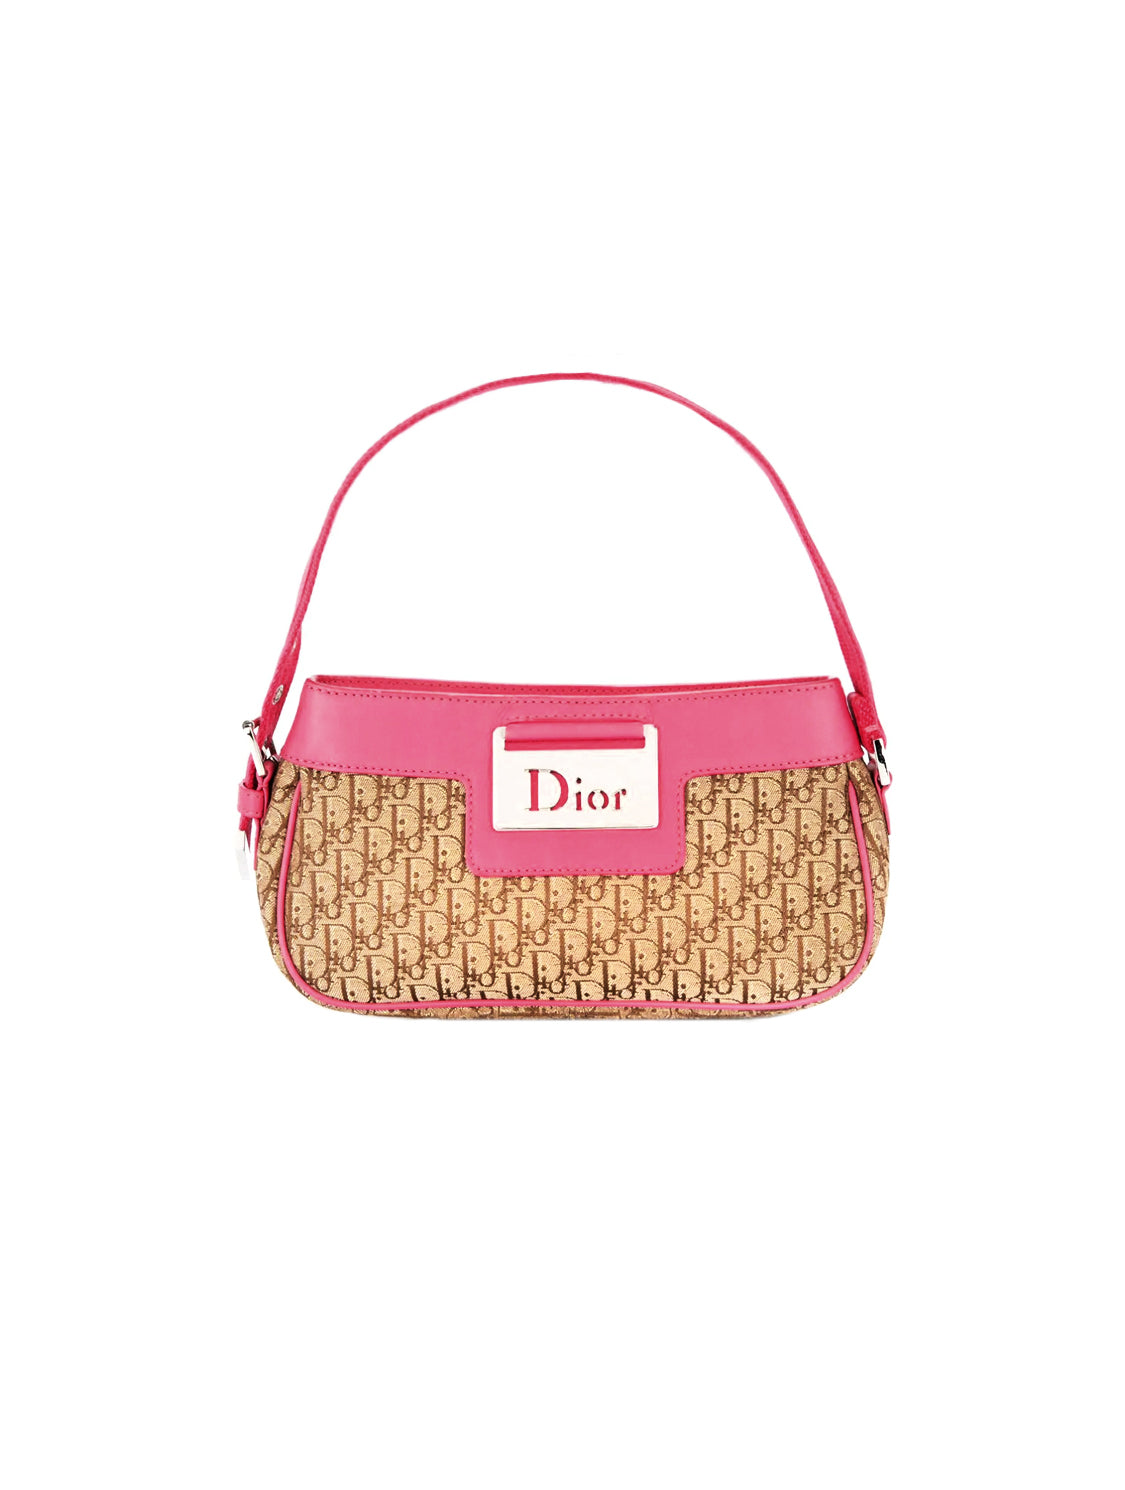 Christian Dior Monogram Canvas Dusty Pink Shoulder Bag  Labellov  Buy And  Sell Authentic Luxury  electricmallcomng